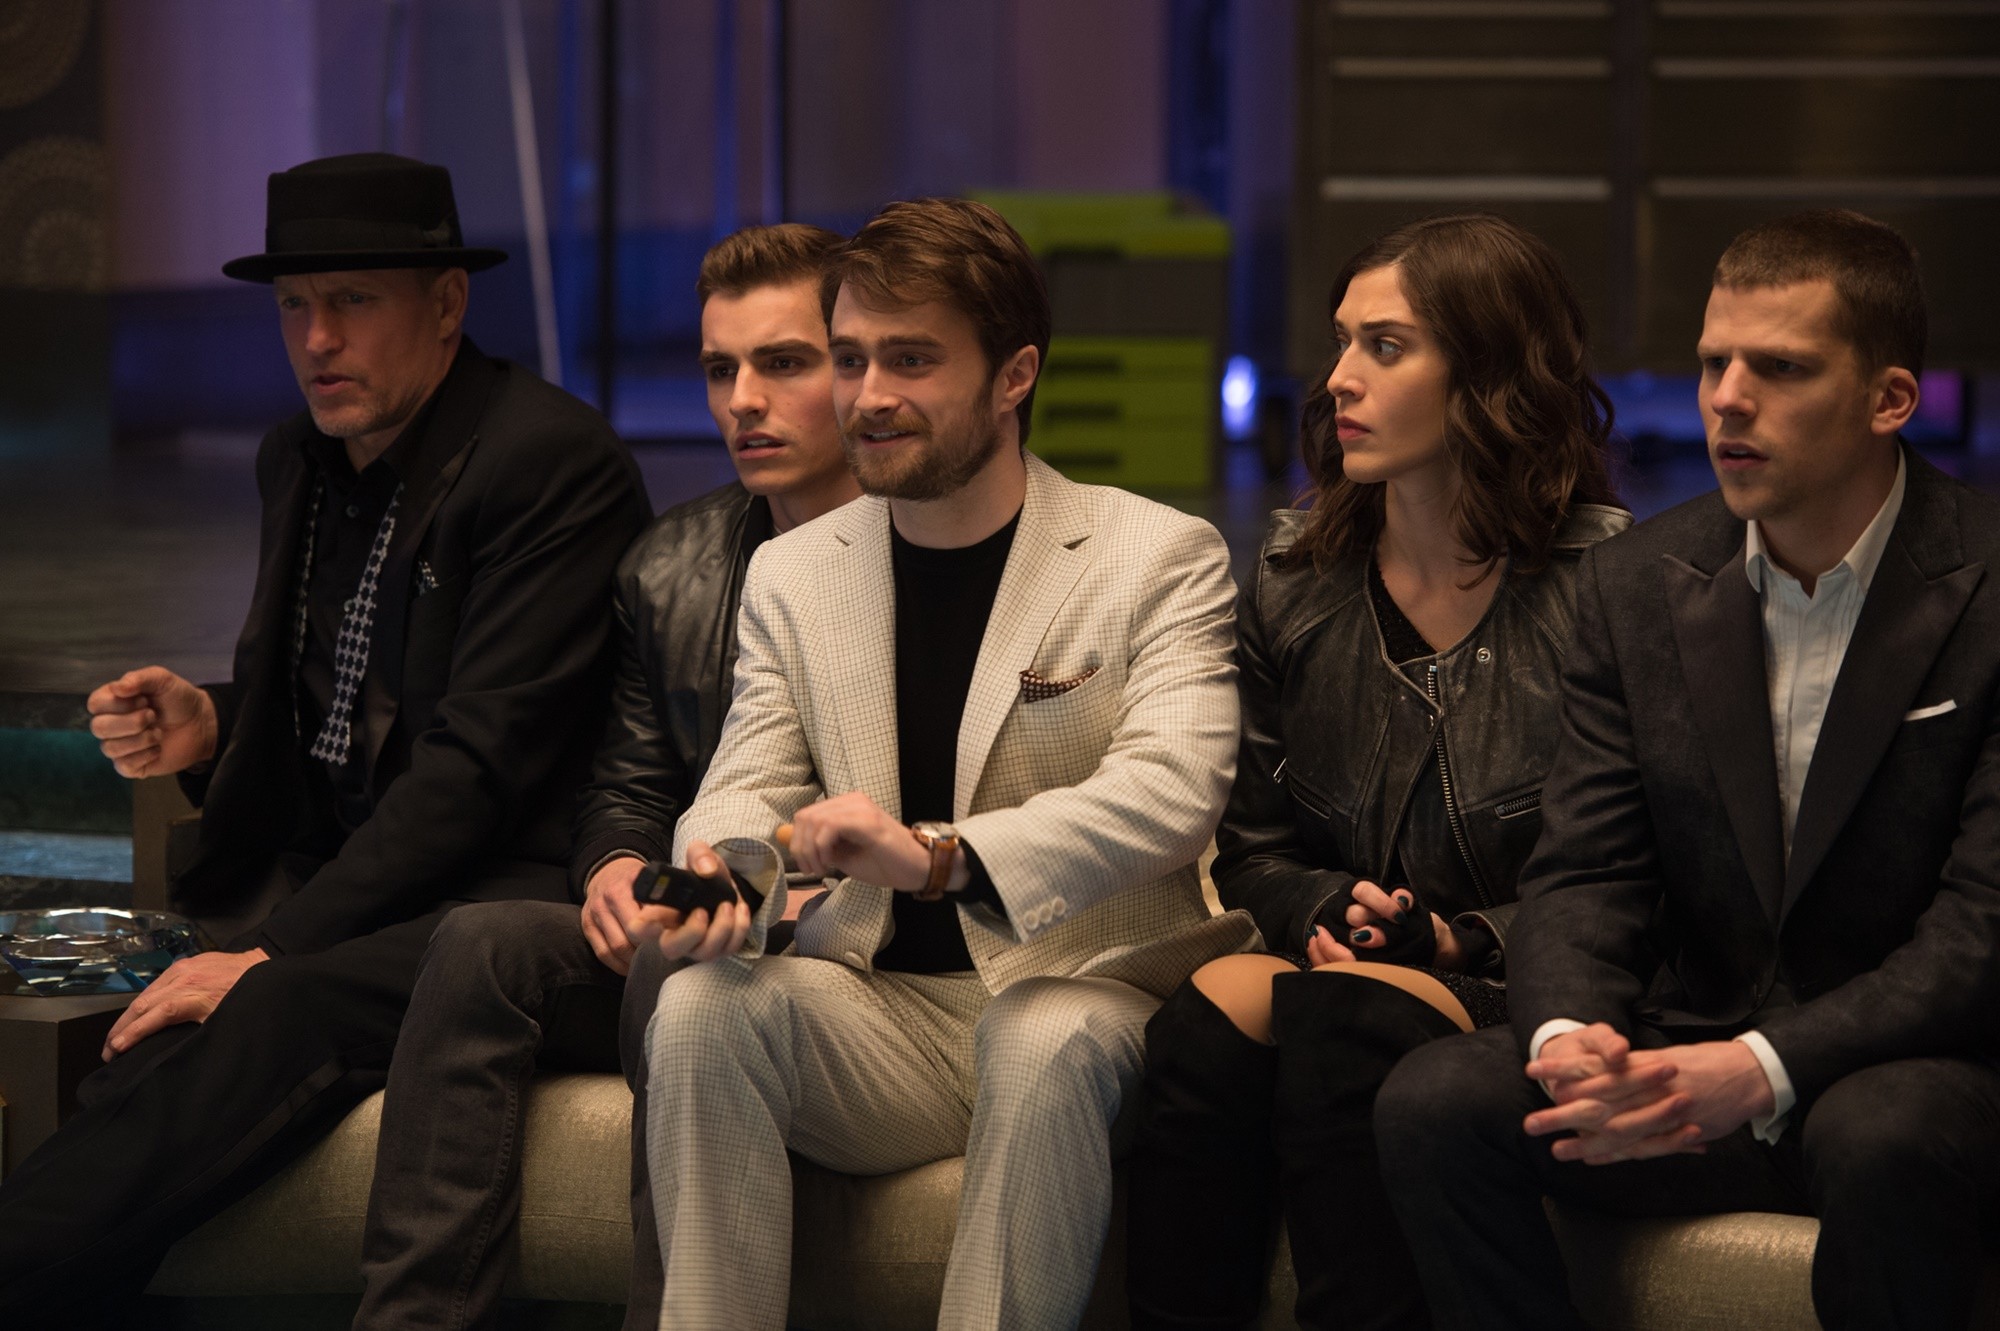 Woody Harrelson, Dave Franco, Daniel Radcliffe, Lizzy Caplan and Jesse Eisenberg in Lionsgate Films' Now You See Me 2 (2016)